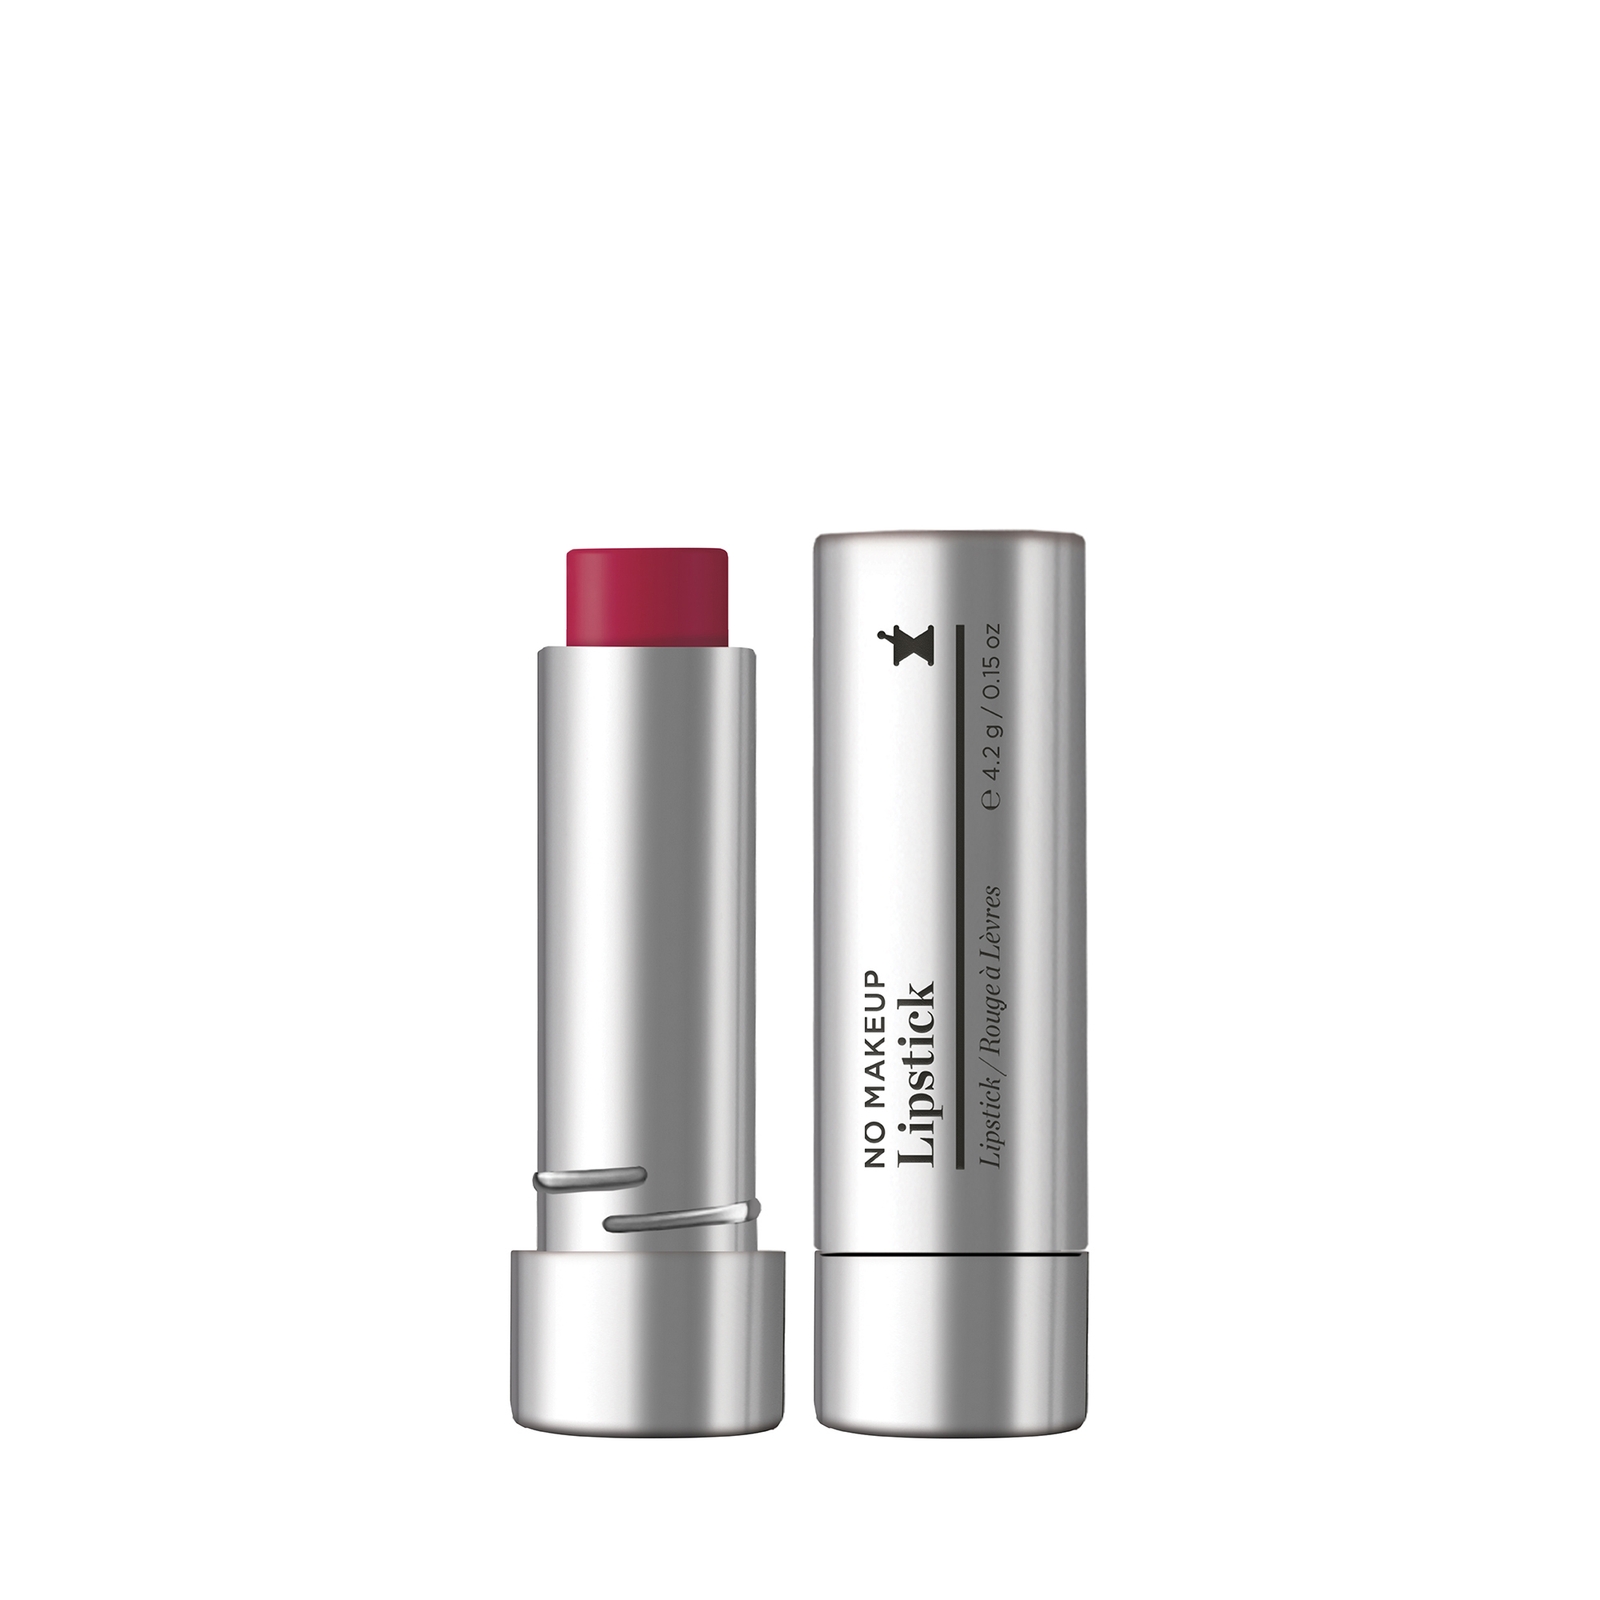 Perricone Md No Makeup Lipstick 4.5g (various Shades) - 3 Berry In Pink